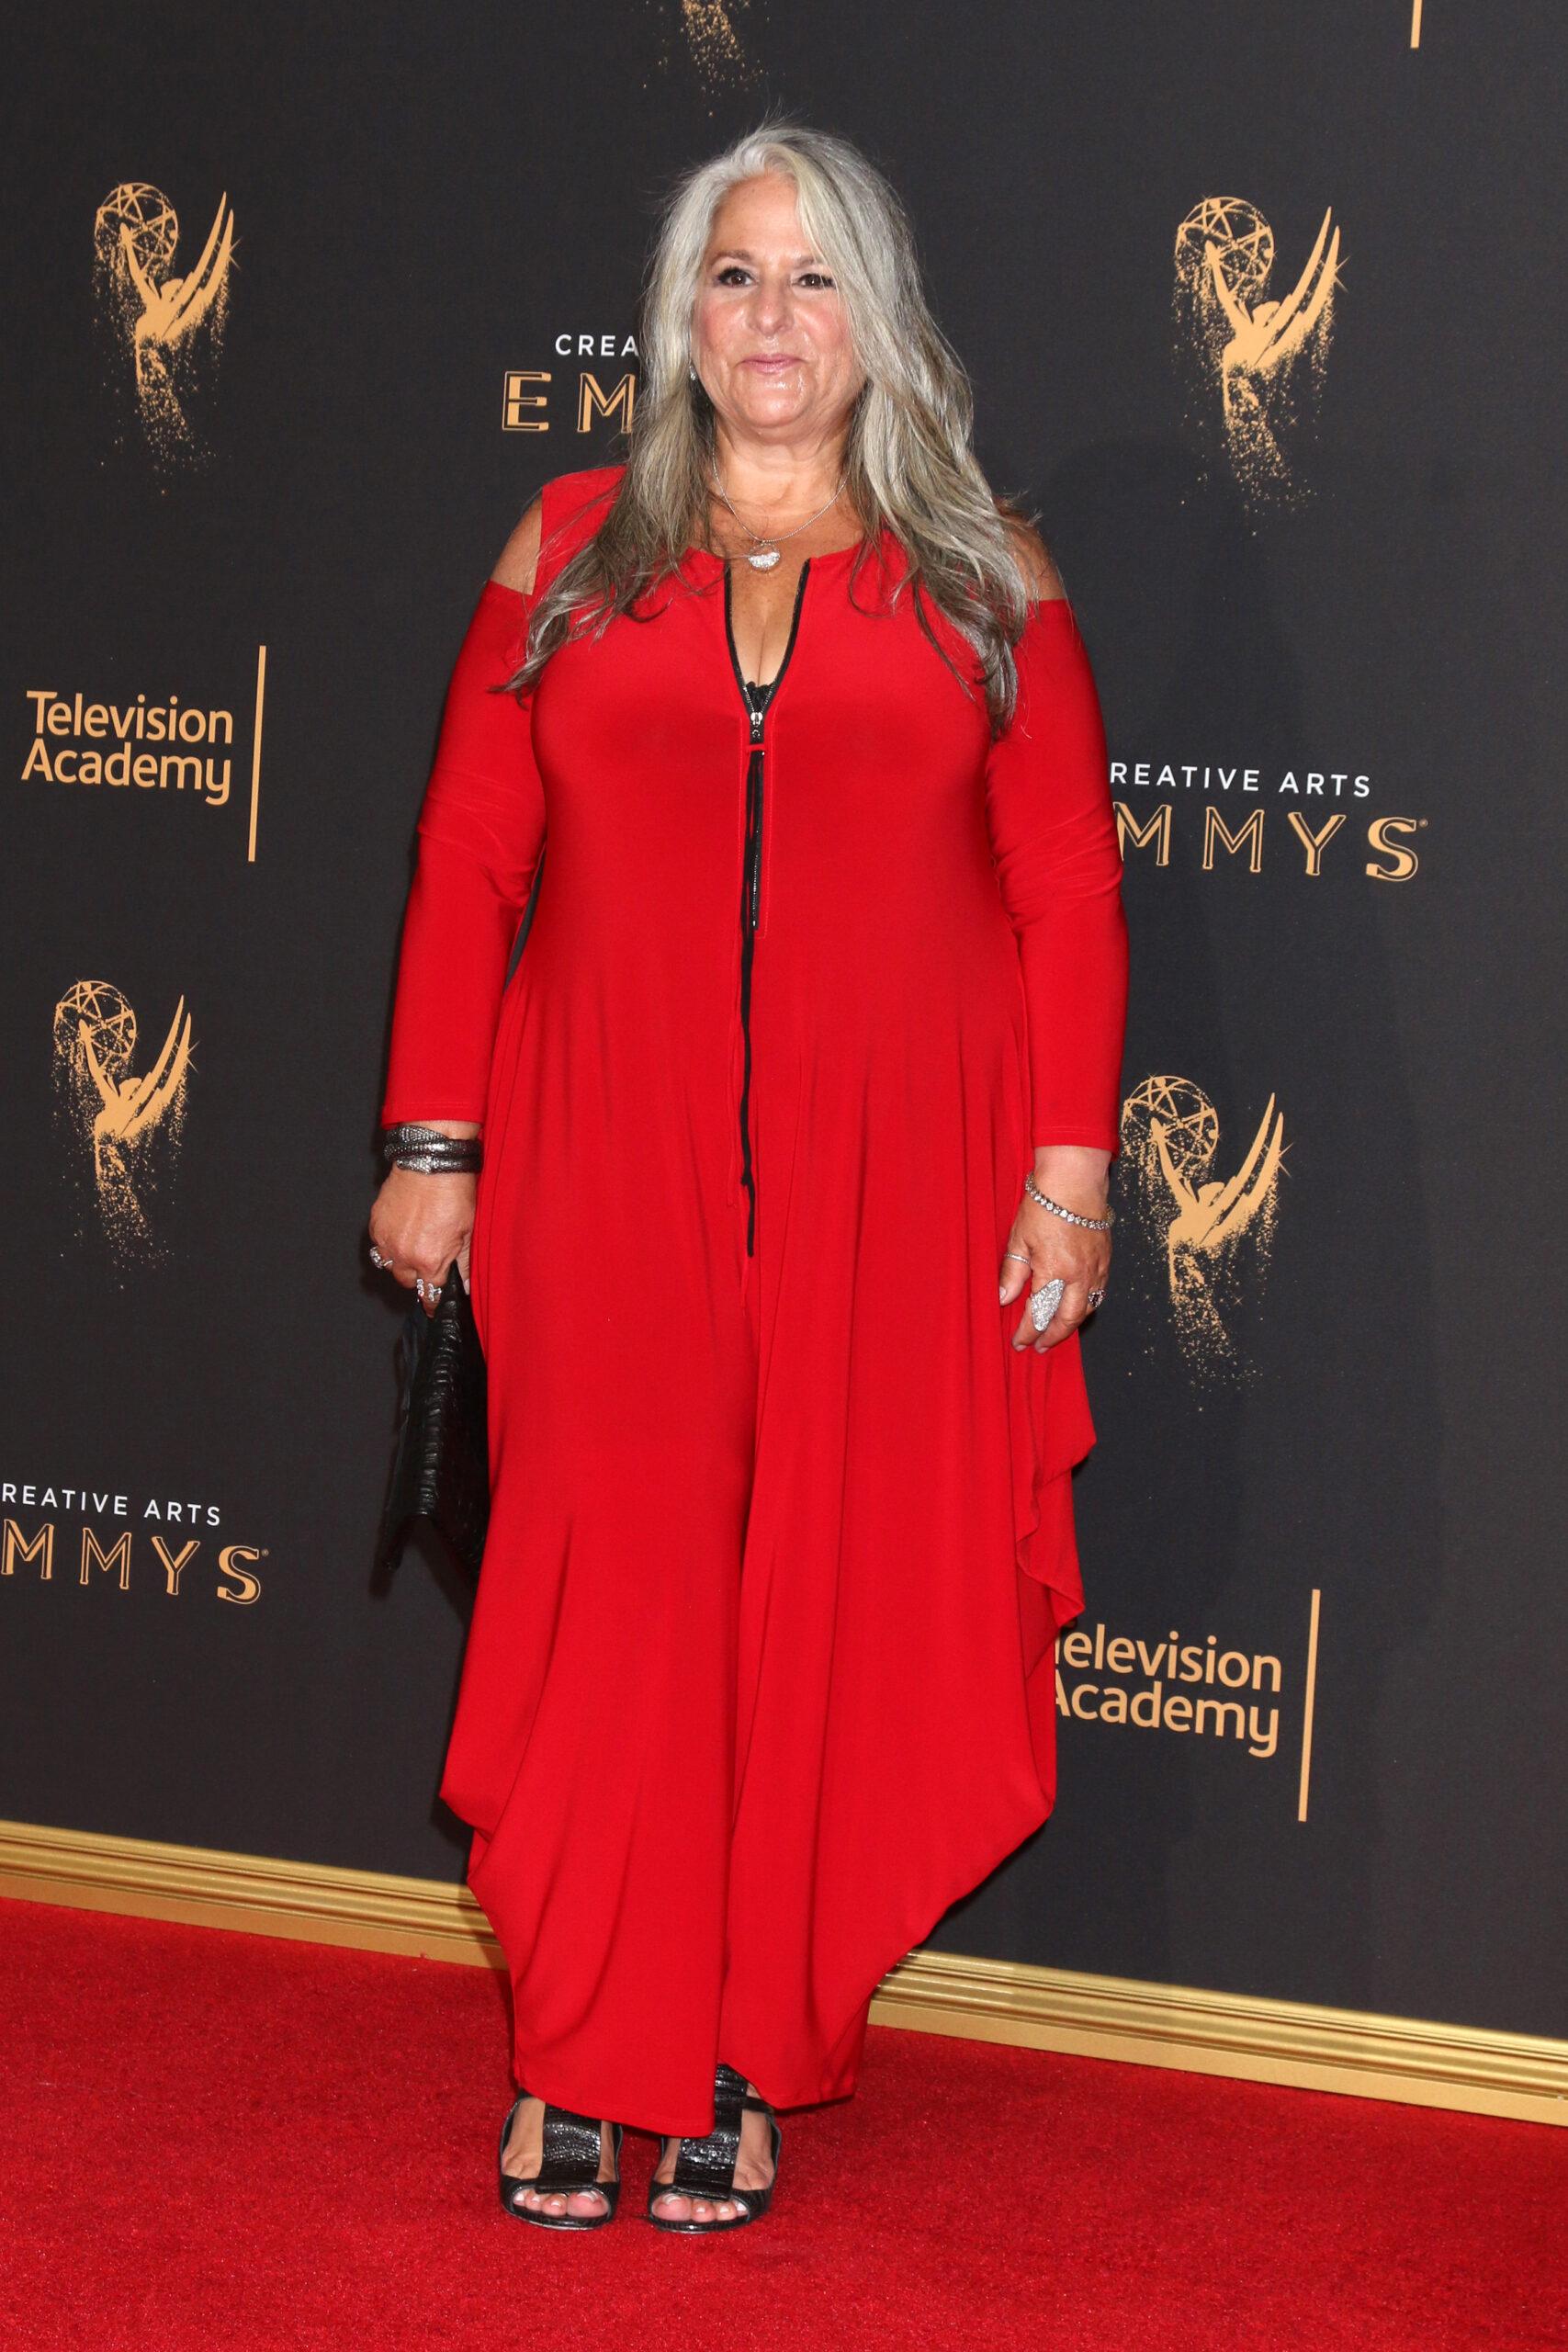 Marta Kauffman at the 2017 Creative Arts Emmy Awards - Arrivals at the Microsoft Theater on September 10, 2017 in Los Angeles, CA 